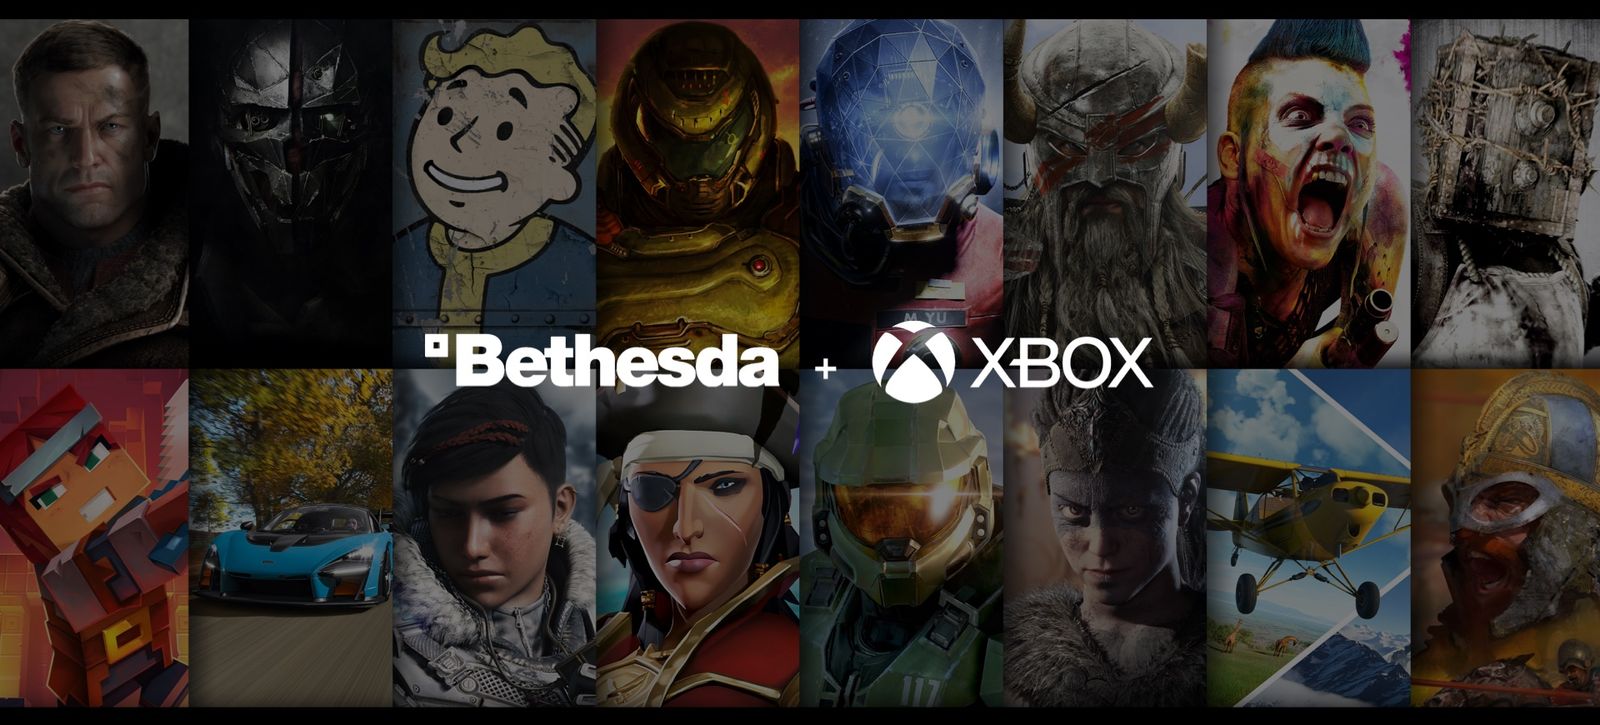 An image of all Bethesda properties with xbox and bethesda logos